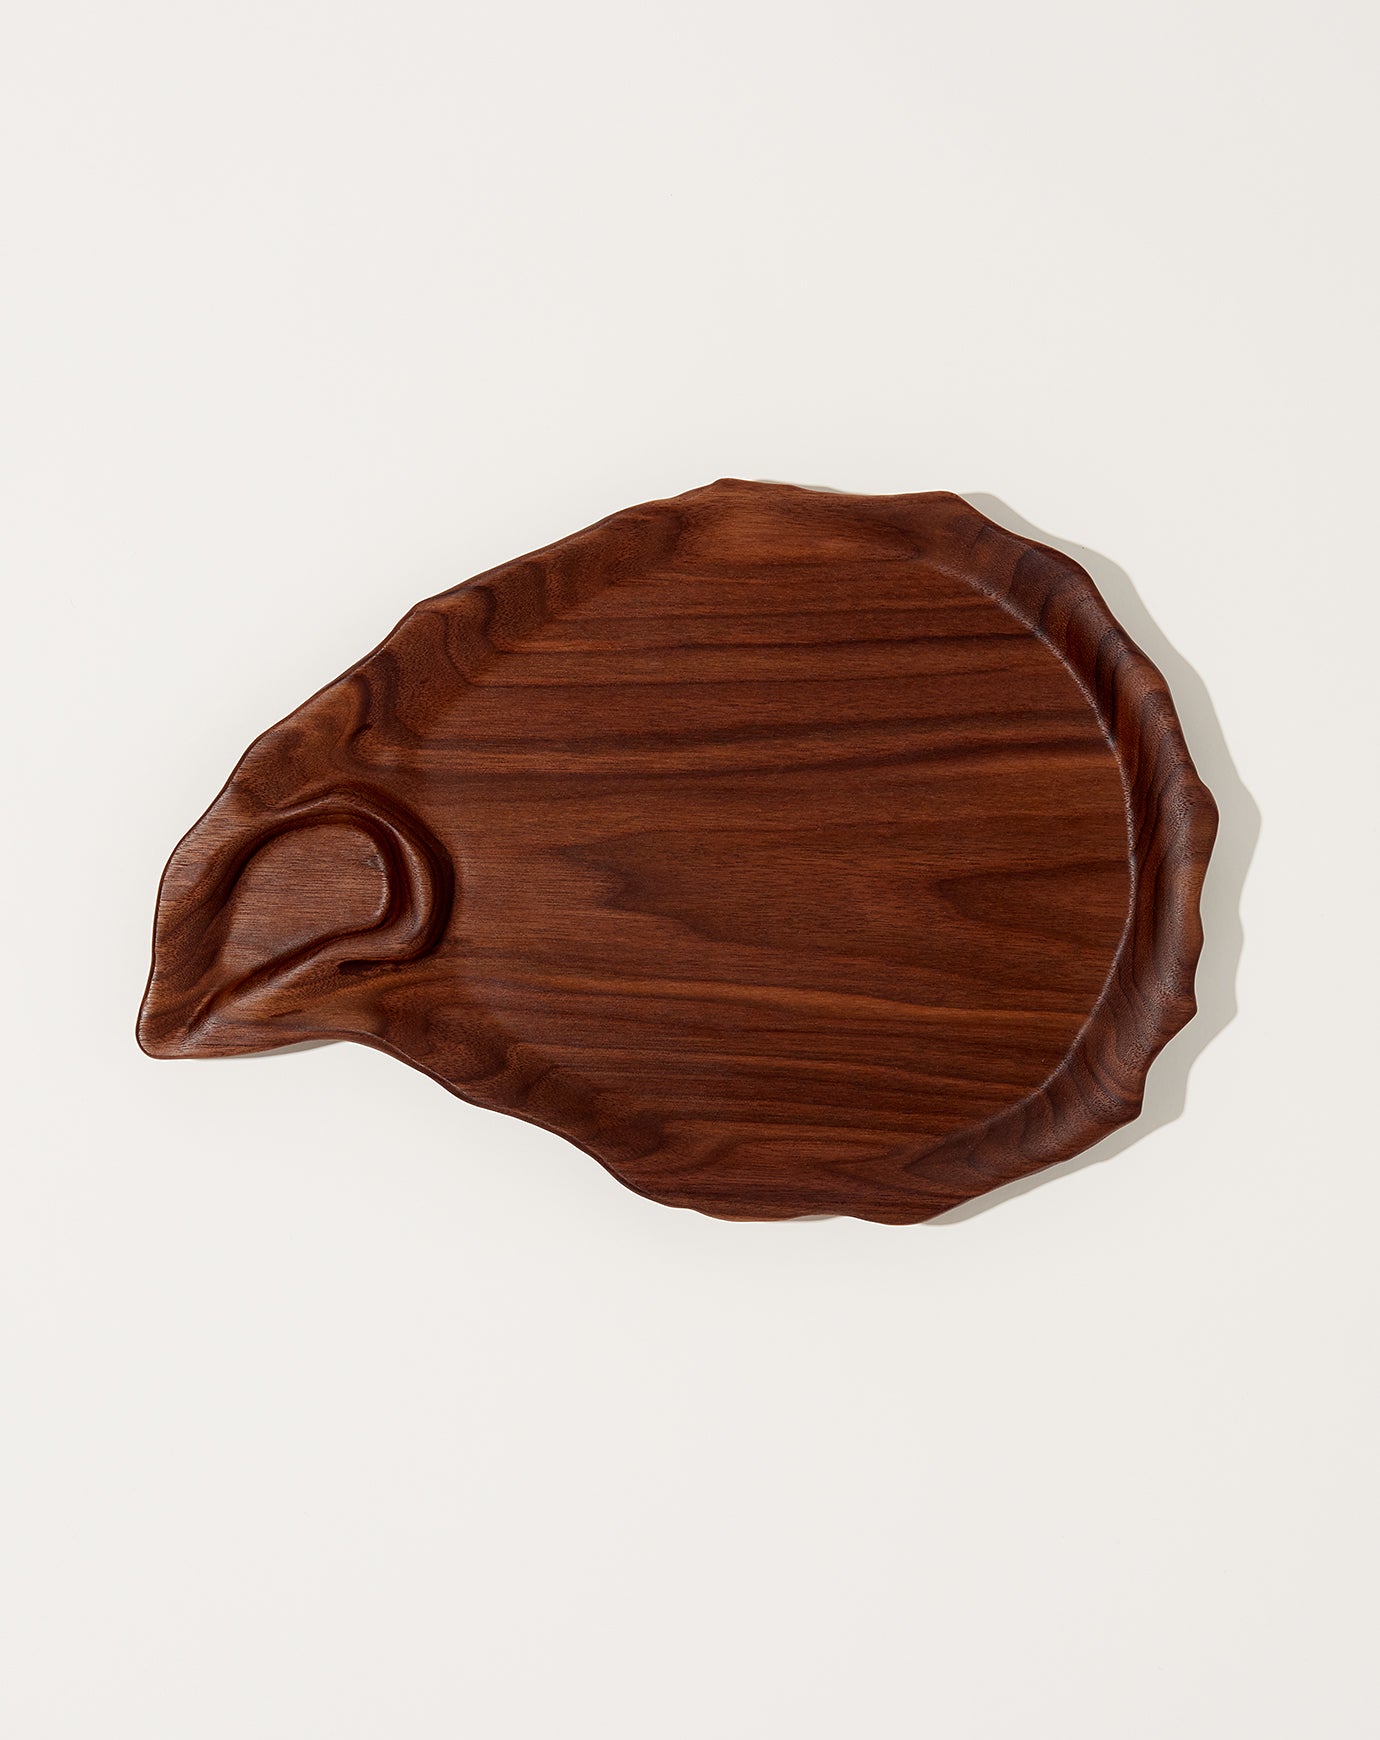 Oyster River Joinery 1 Well Oyster Platter in Walnut